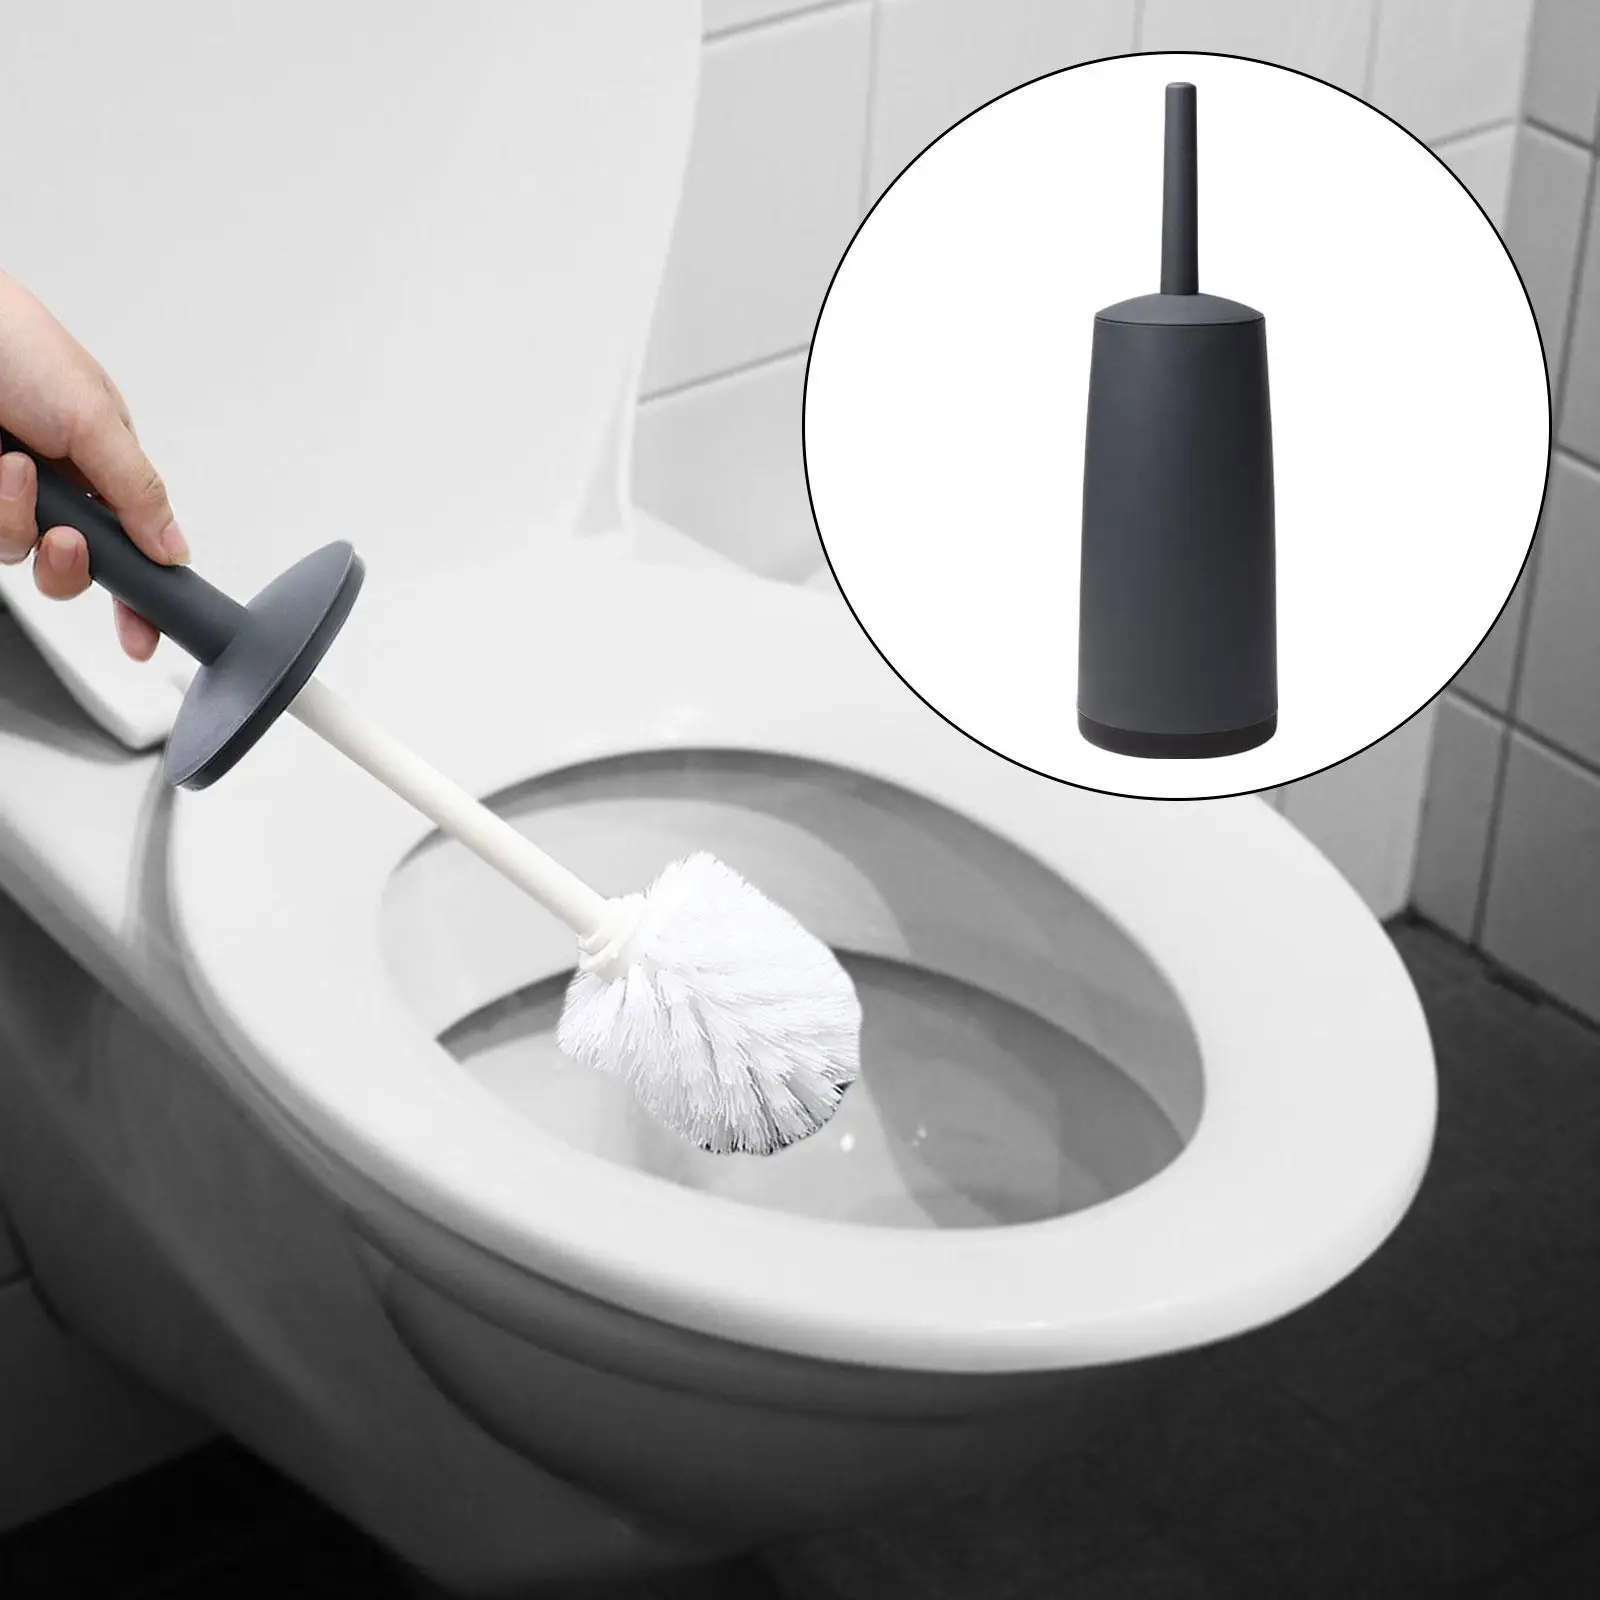 Toilet Cleaning Brush and Holder Set Cleaning Supplies Toilet Bowl Brush and Holder